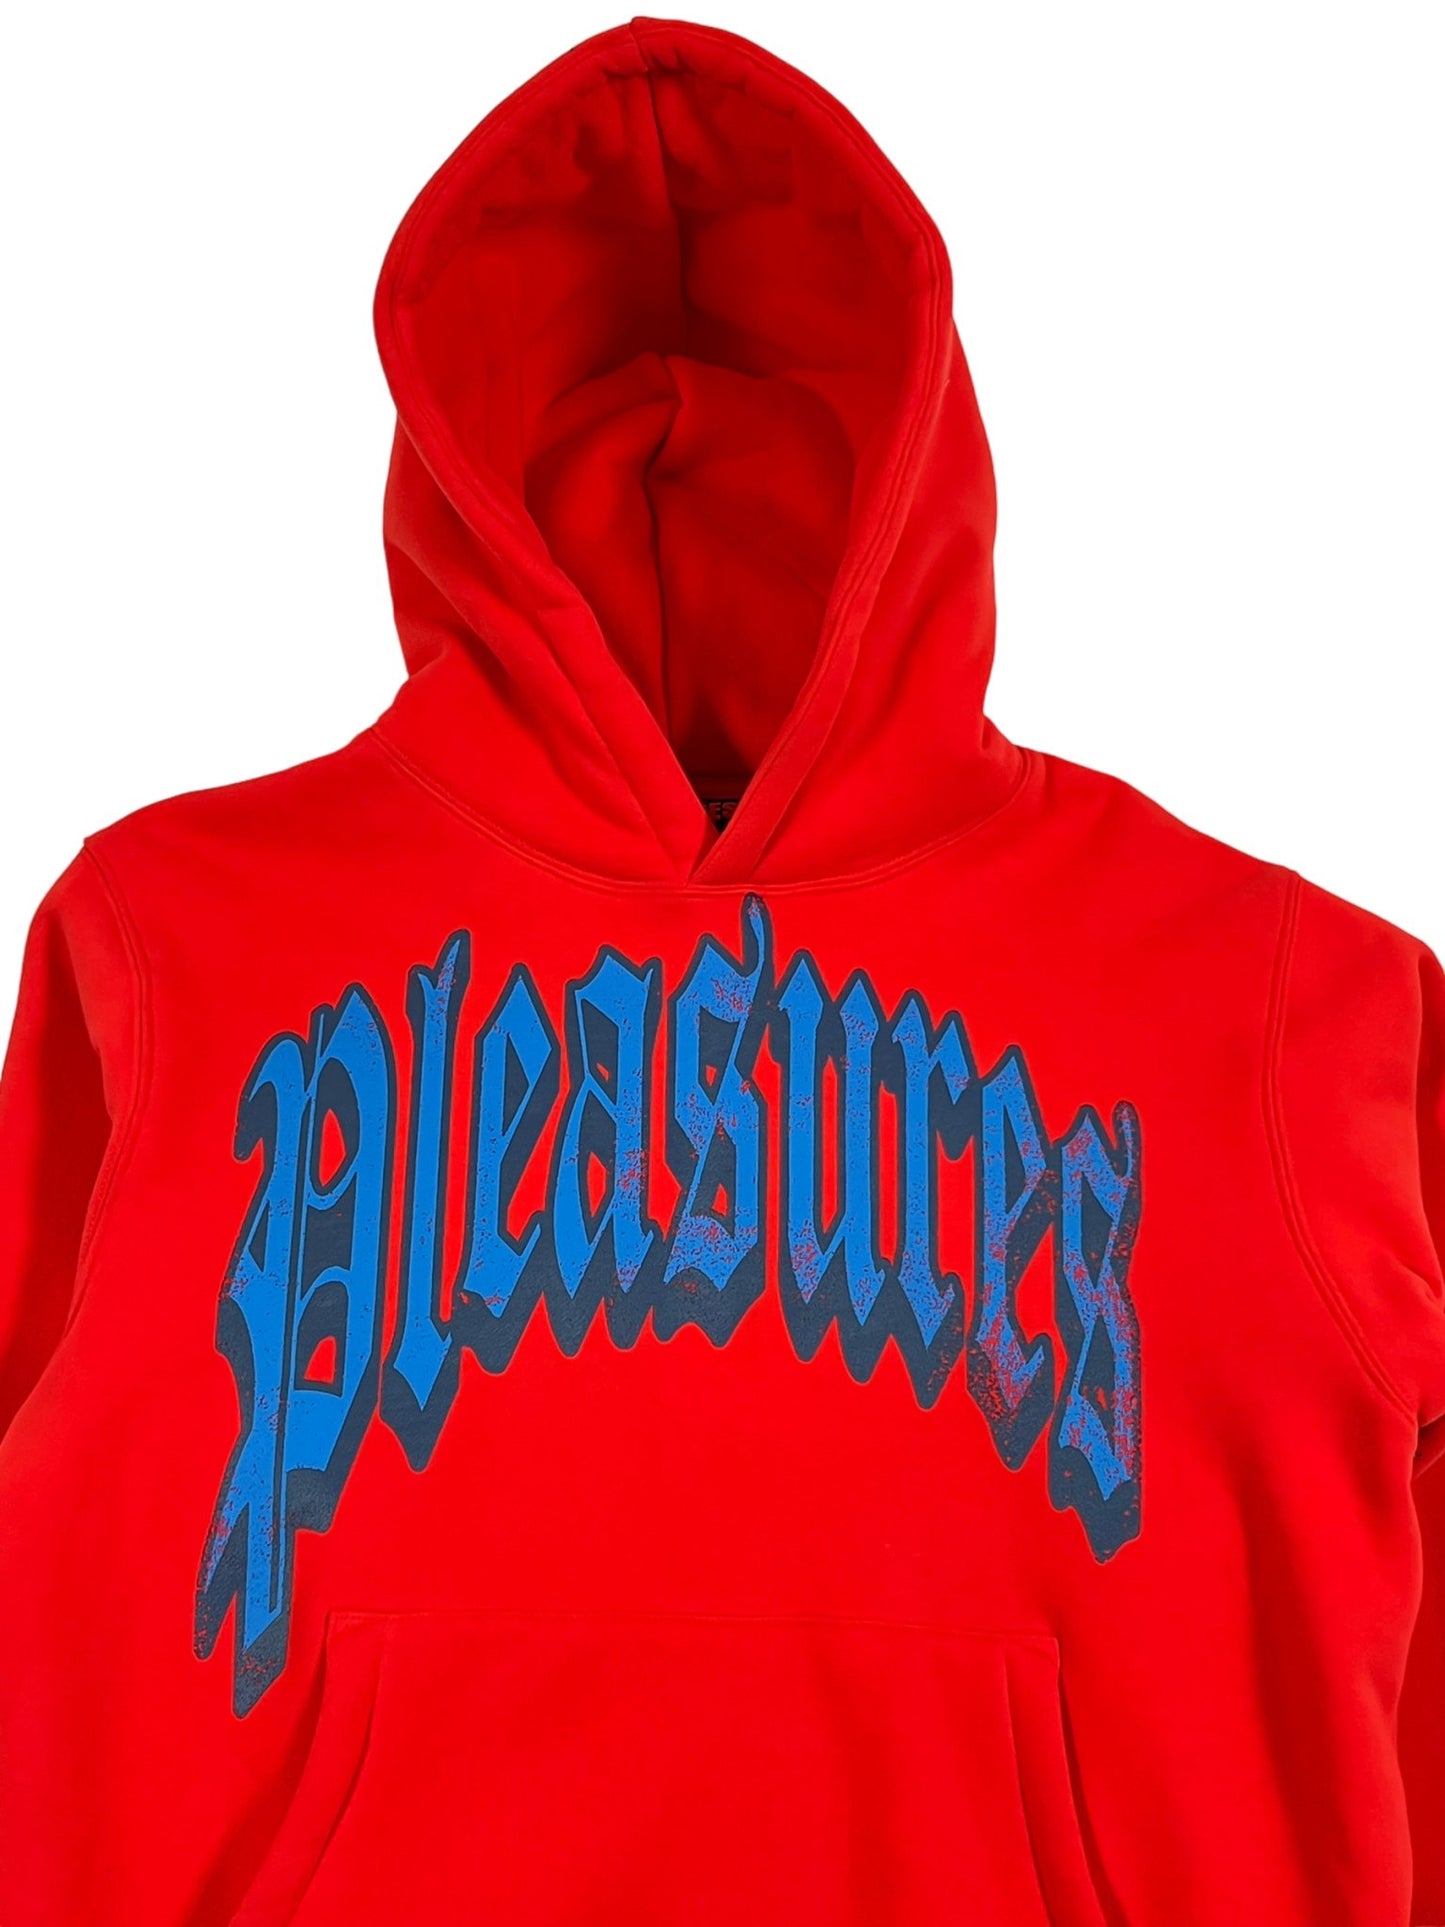 A red cotton PLEASURES hoodie with the word pleasures on it and a kangaroo pocket.